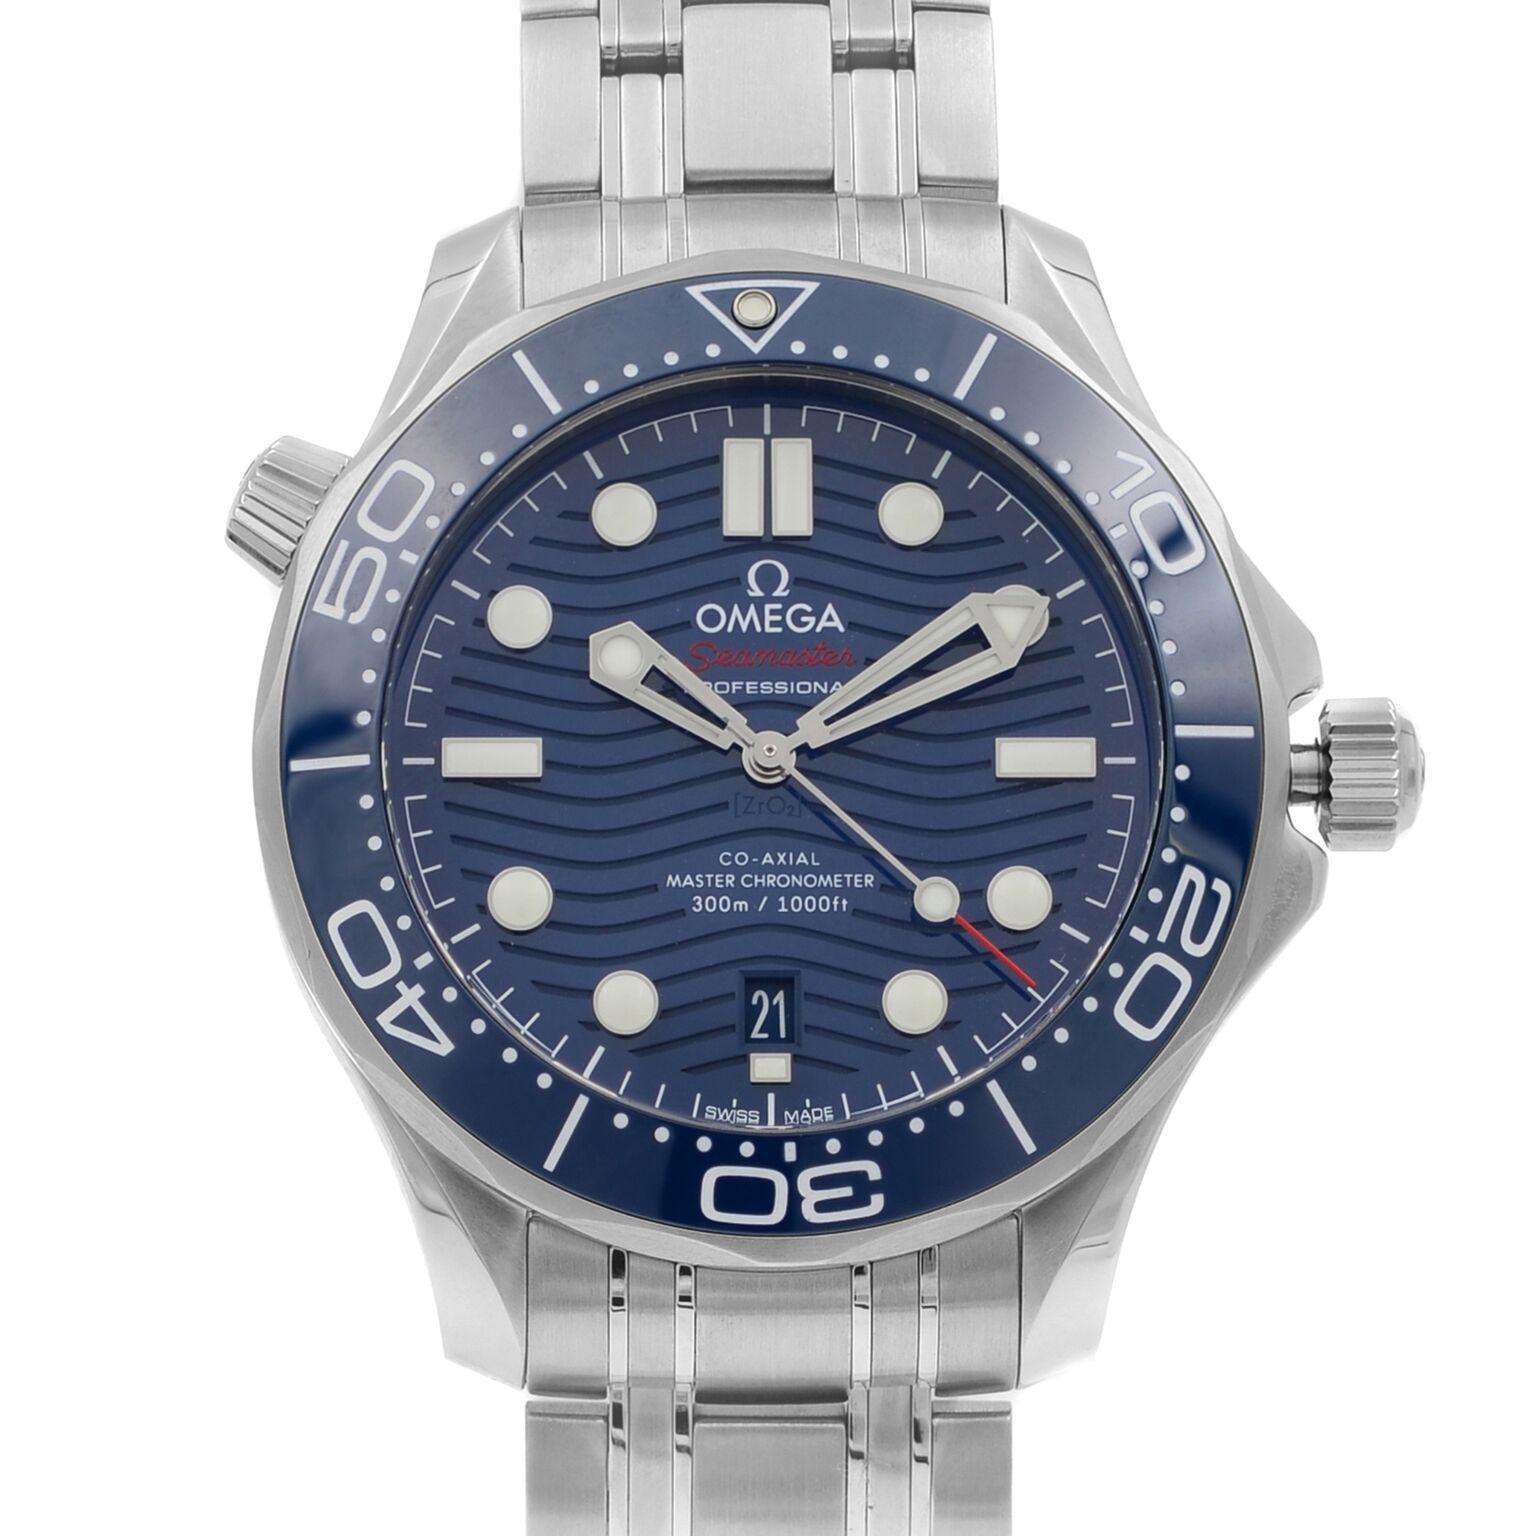 This New Without Tags Omega Seamaster 210.30.42.20.03.001 is a beautiful men's timepiece that is powered by mechanical (automatic) movement which is cased in a stainless steel case. It has a round shape face, date indicator dial and has hand sticks